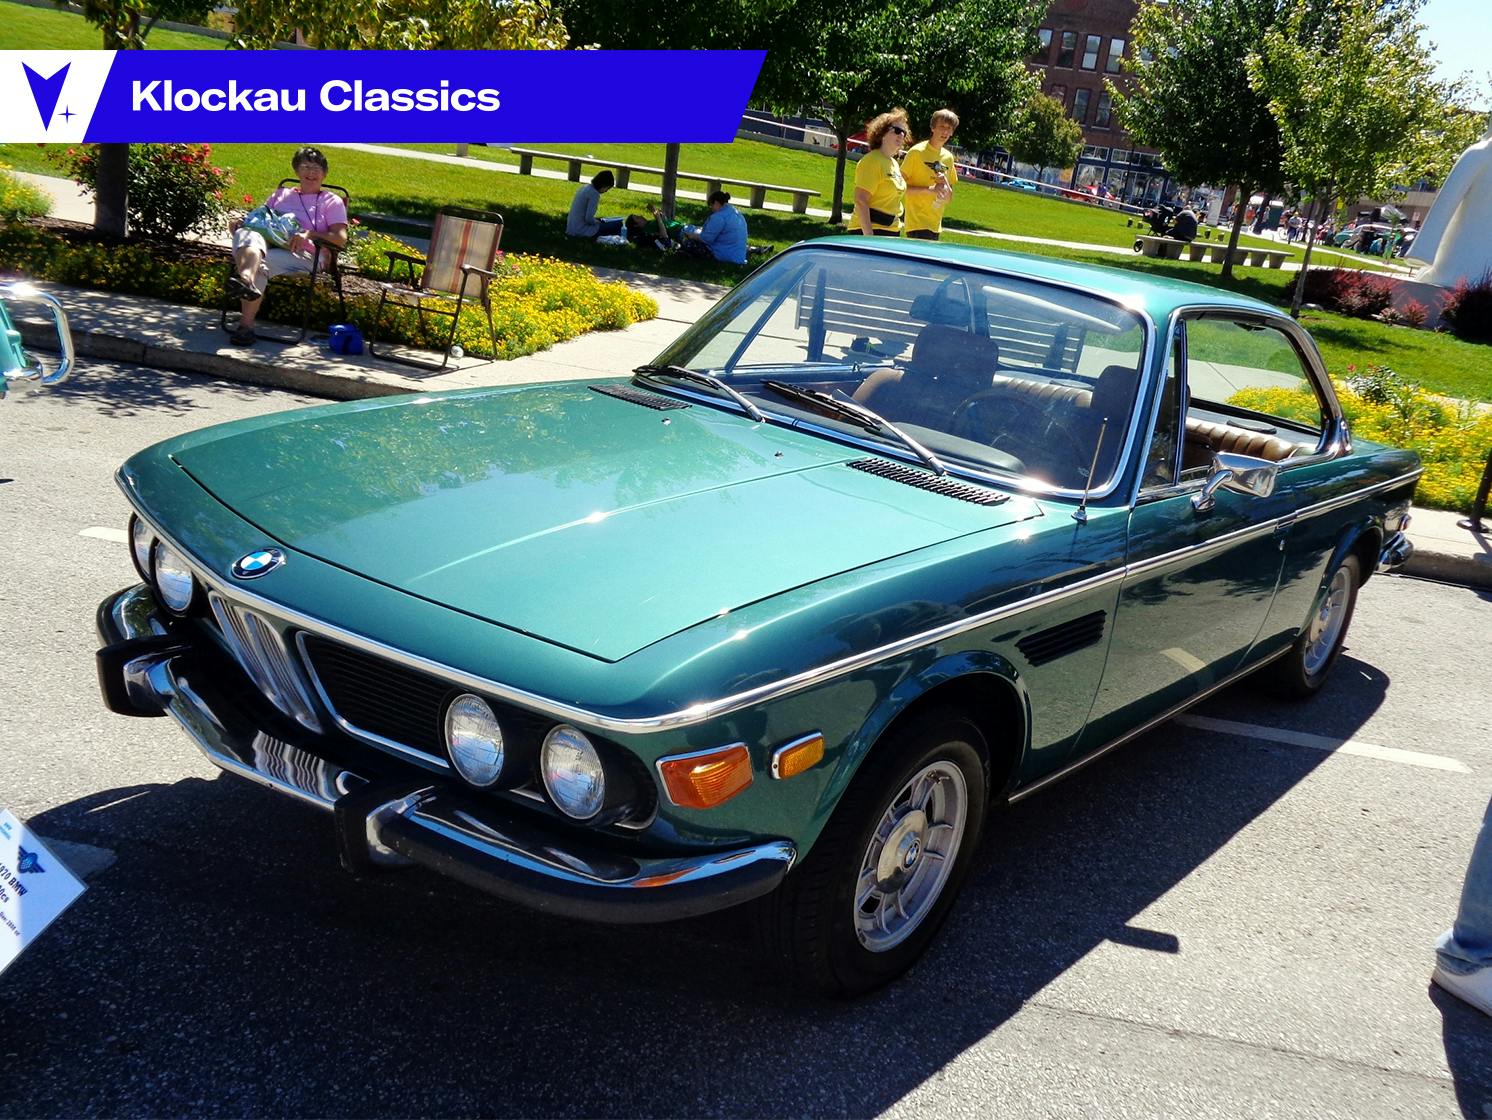 1970 BMW 2800 CS: The Ultimate Green Machine? - Hagerty Media